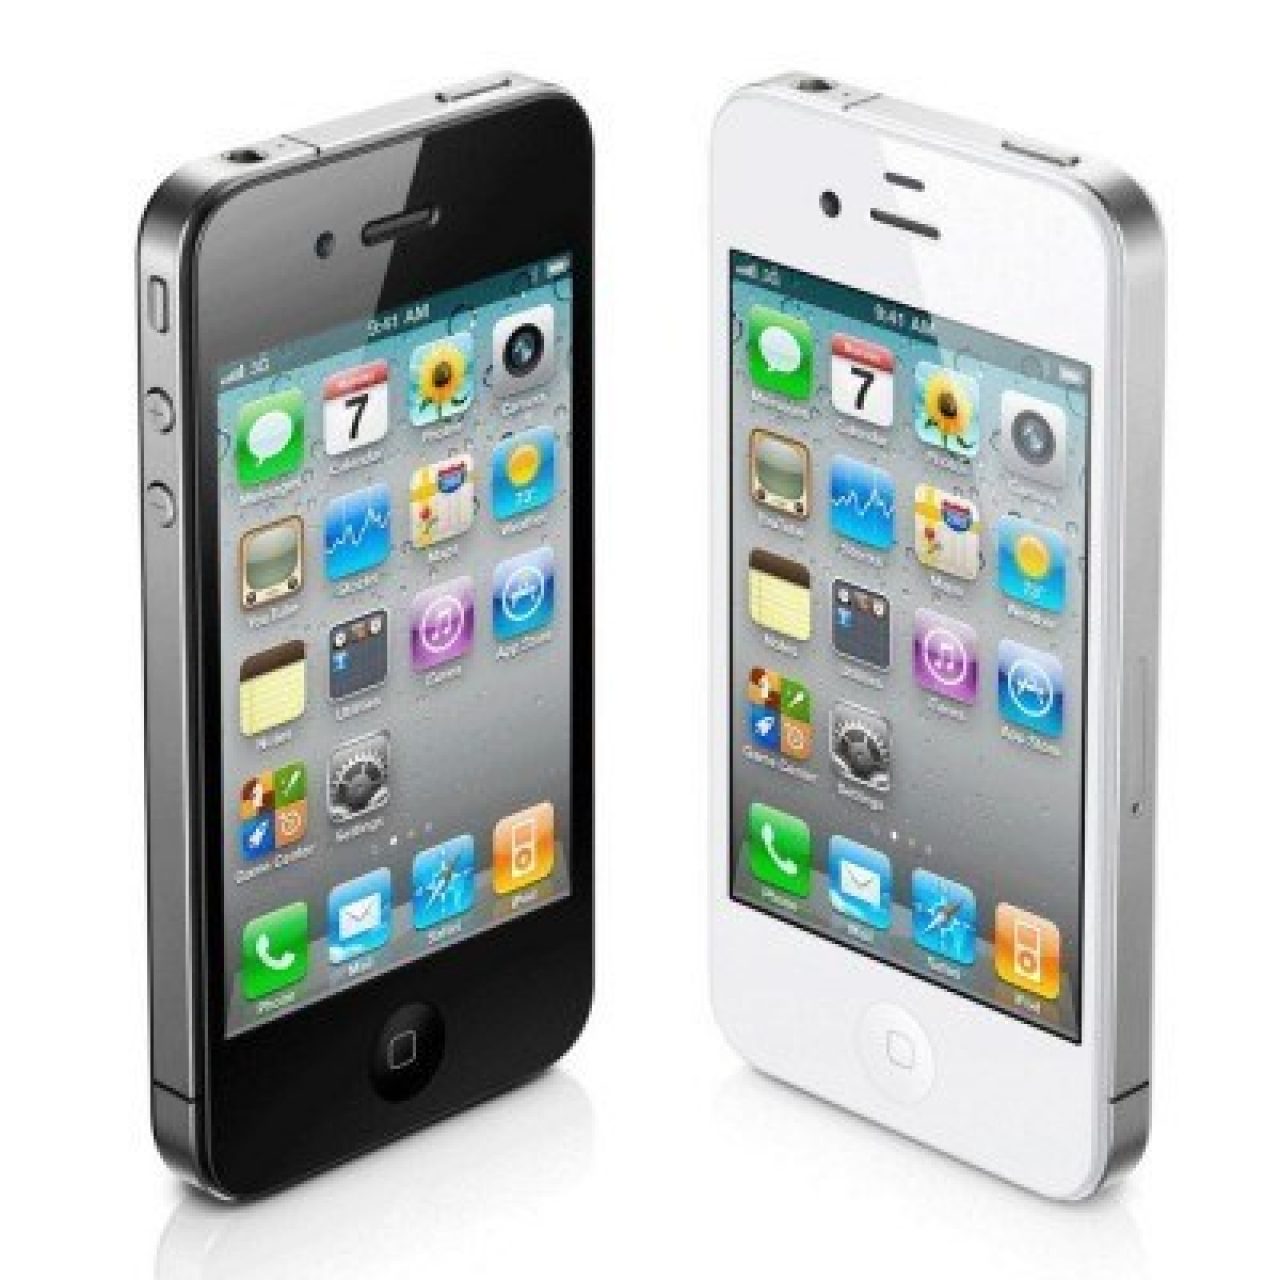 iPhone 4S Features, Release Date, Specs in Detail - Phones Counter